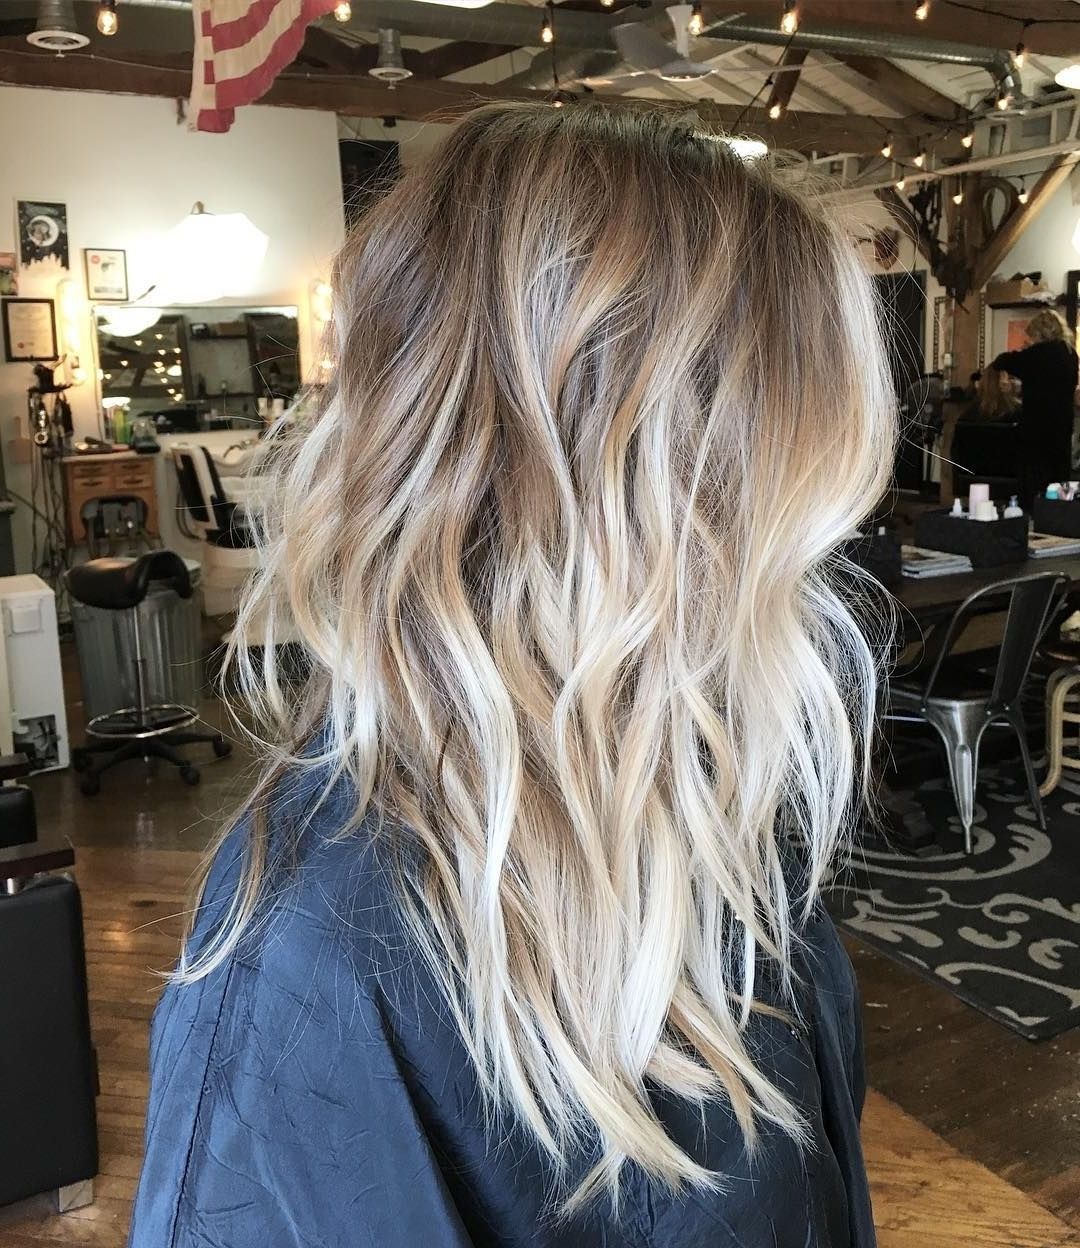 Wavy Layers, Dark Blonde Within 2018 White And Dirty Blonde Combo Hairstyles (View 18 of 20)